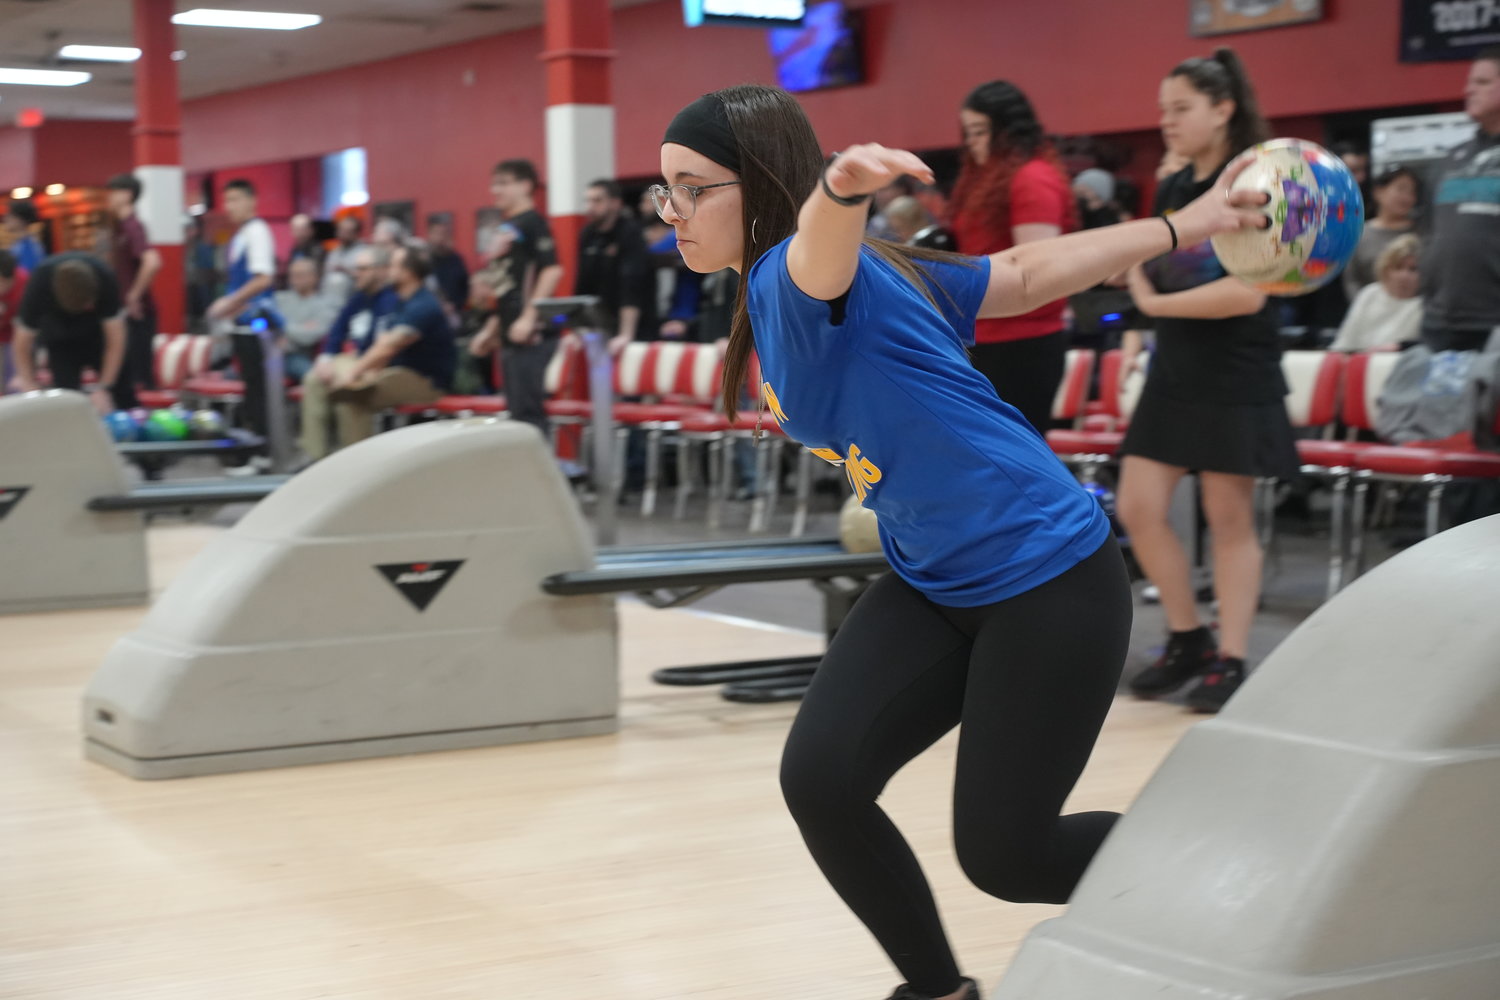 East Meadow High School sophomore bowler Amanda Morris competed in Nassau’s All County individual championships on Feb. 11. She took home second place.